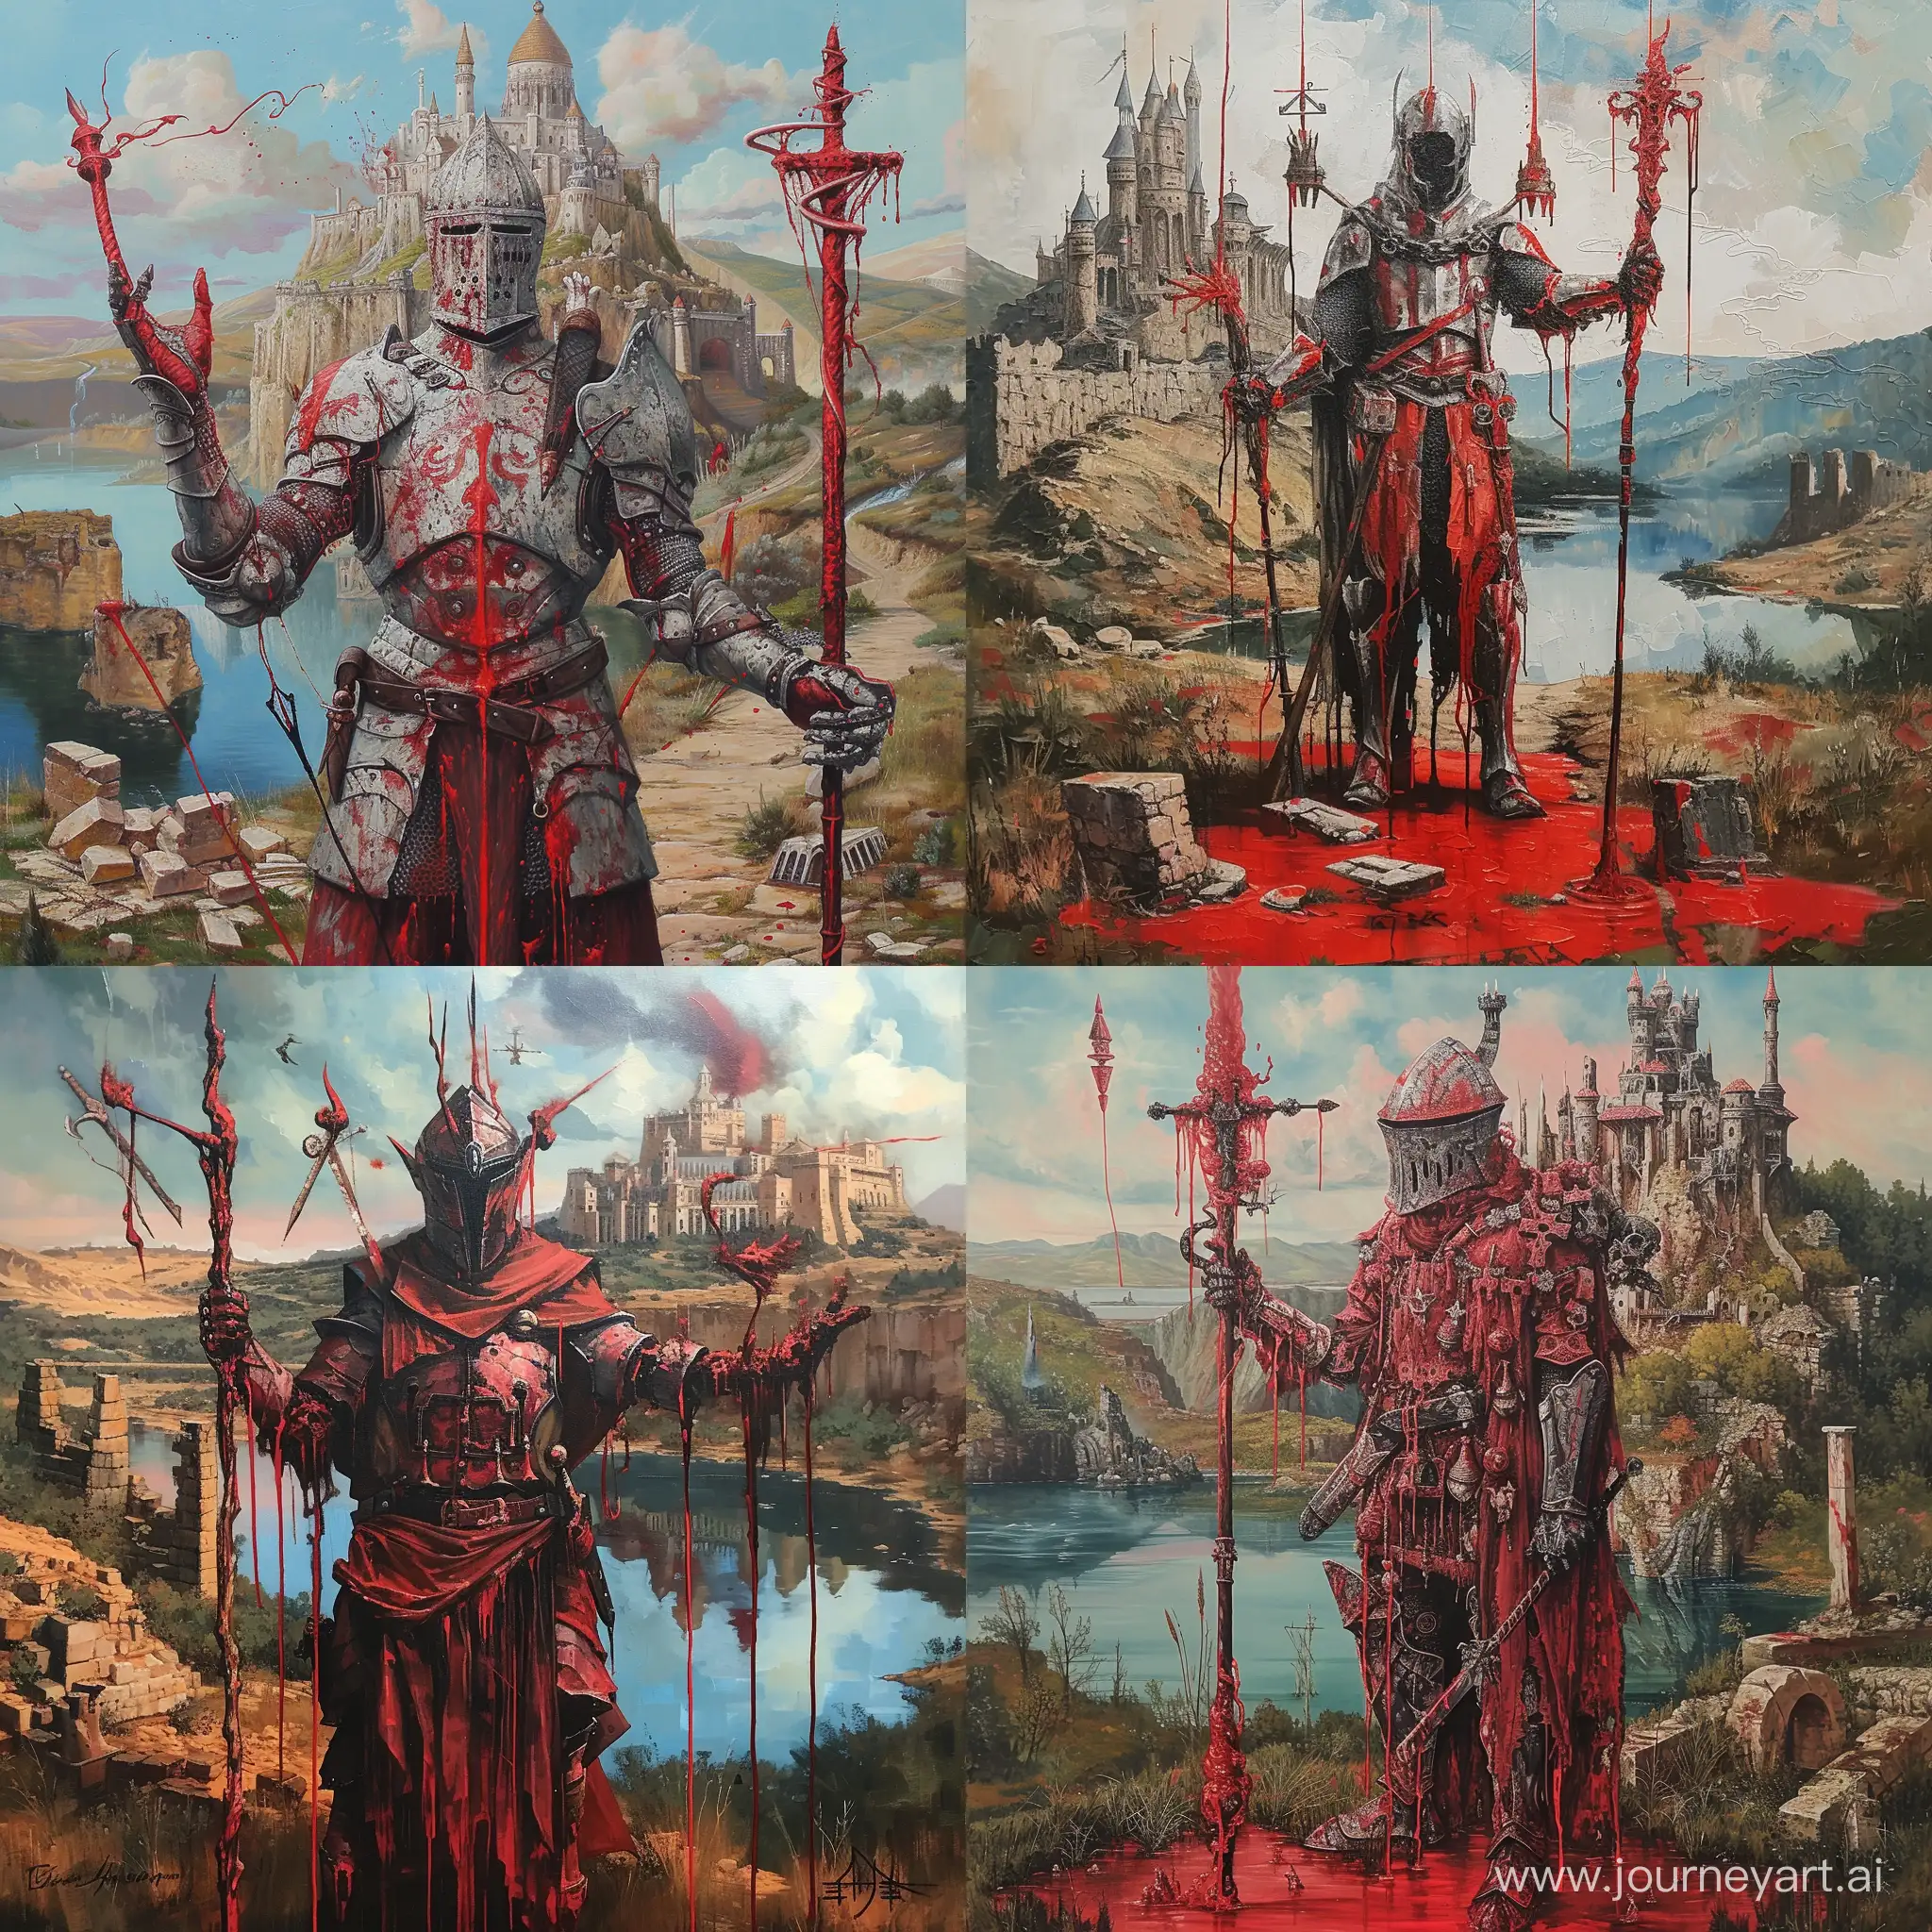 the painting is made in a traditional style, the painting is made with oil paints and brushes, the painting depicts a knight magician with a staff and a sword in different hands, the painting has red oil paint, there is a magic academy in the background, the magic academy is located on a hill and surrounded by a lake, there are ruins next to the knight magician